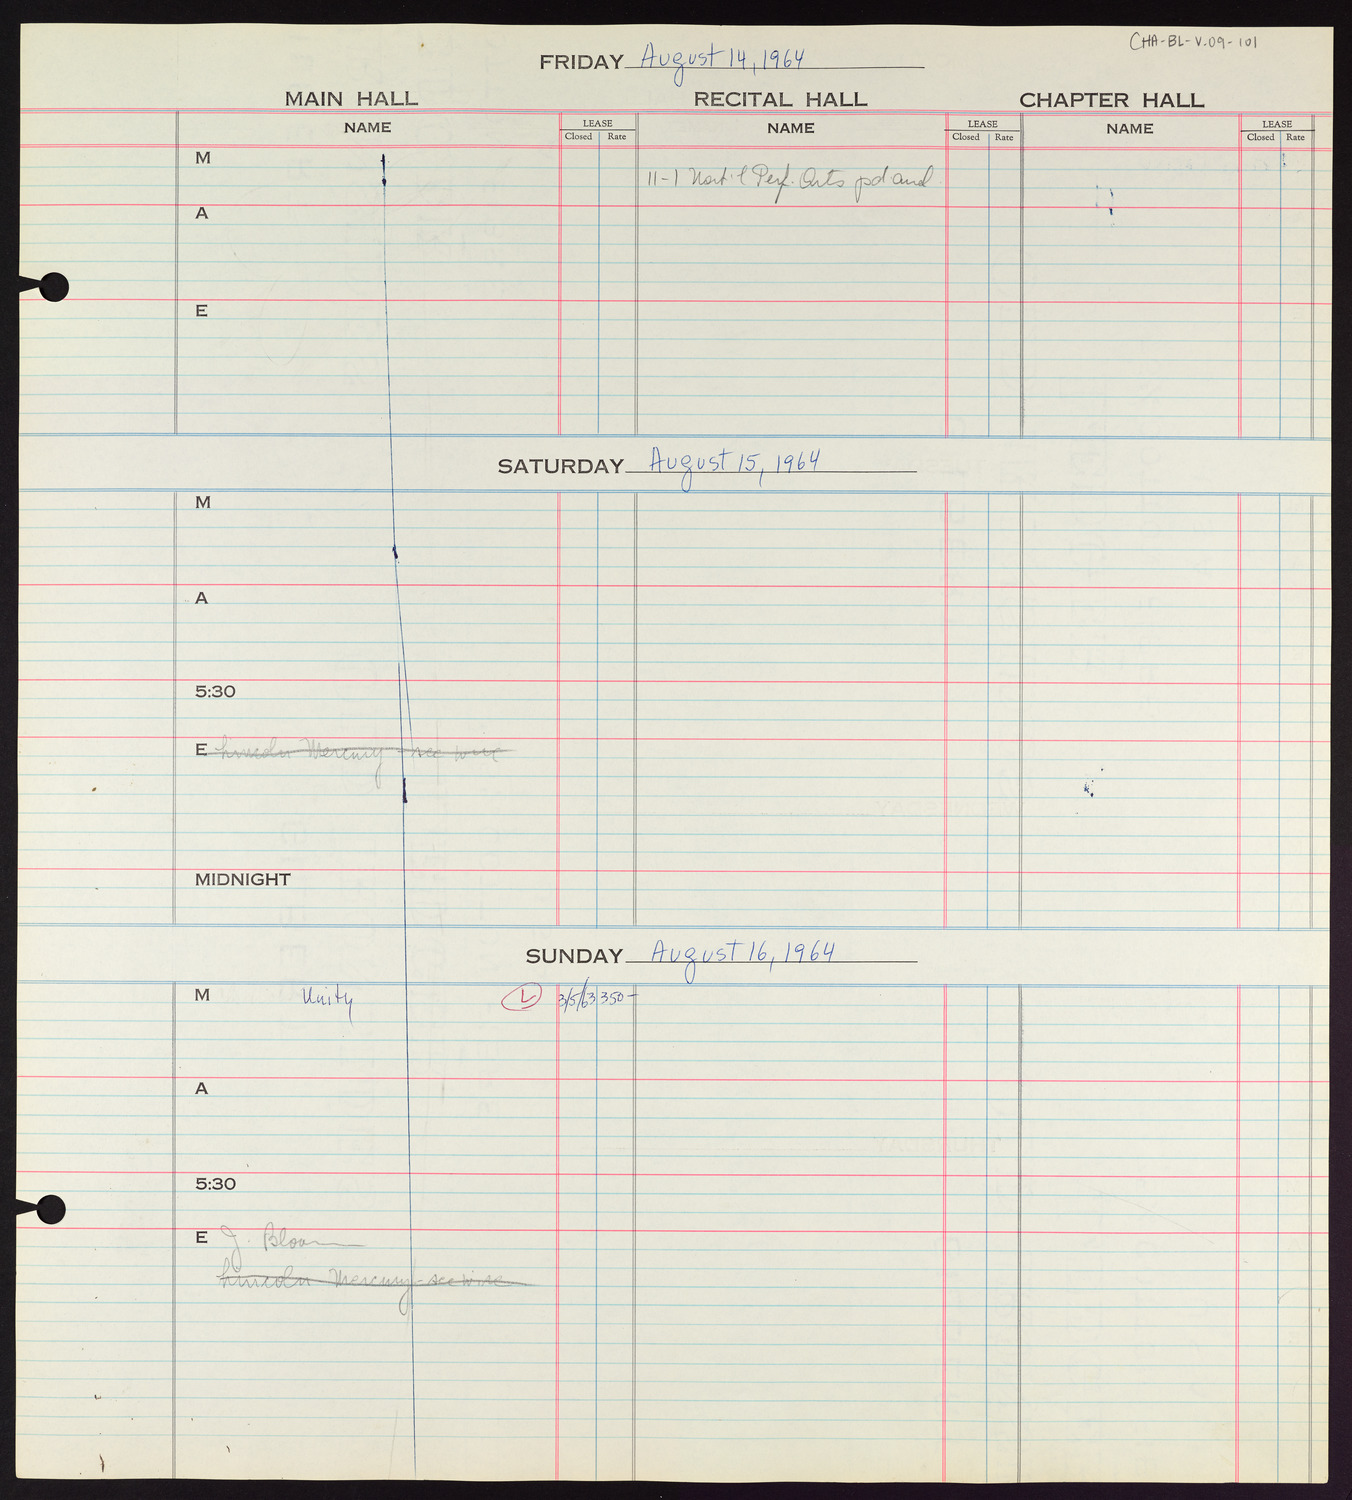 Carnegie Hall Booking Ledger, volume 9, page 101